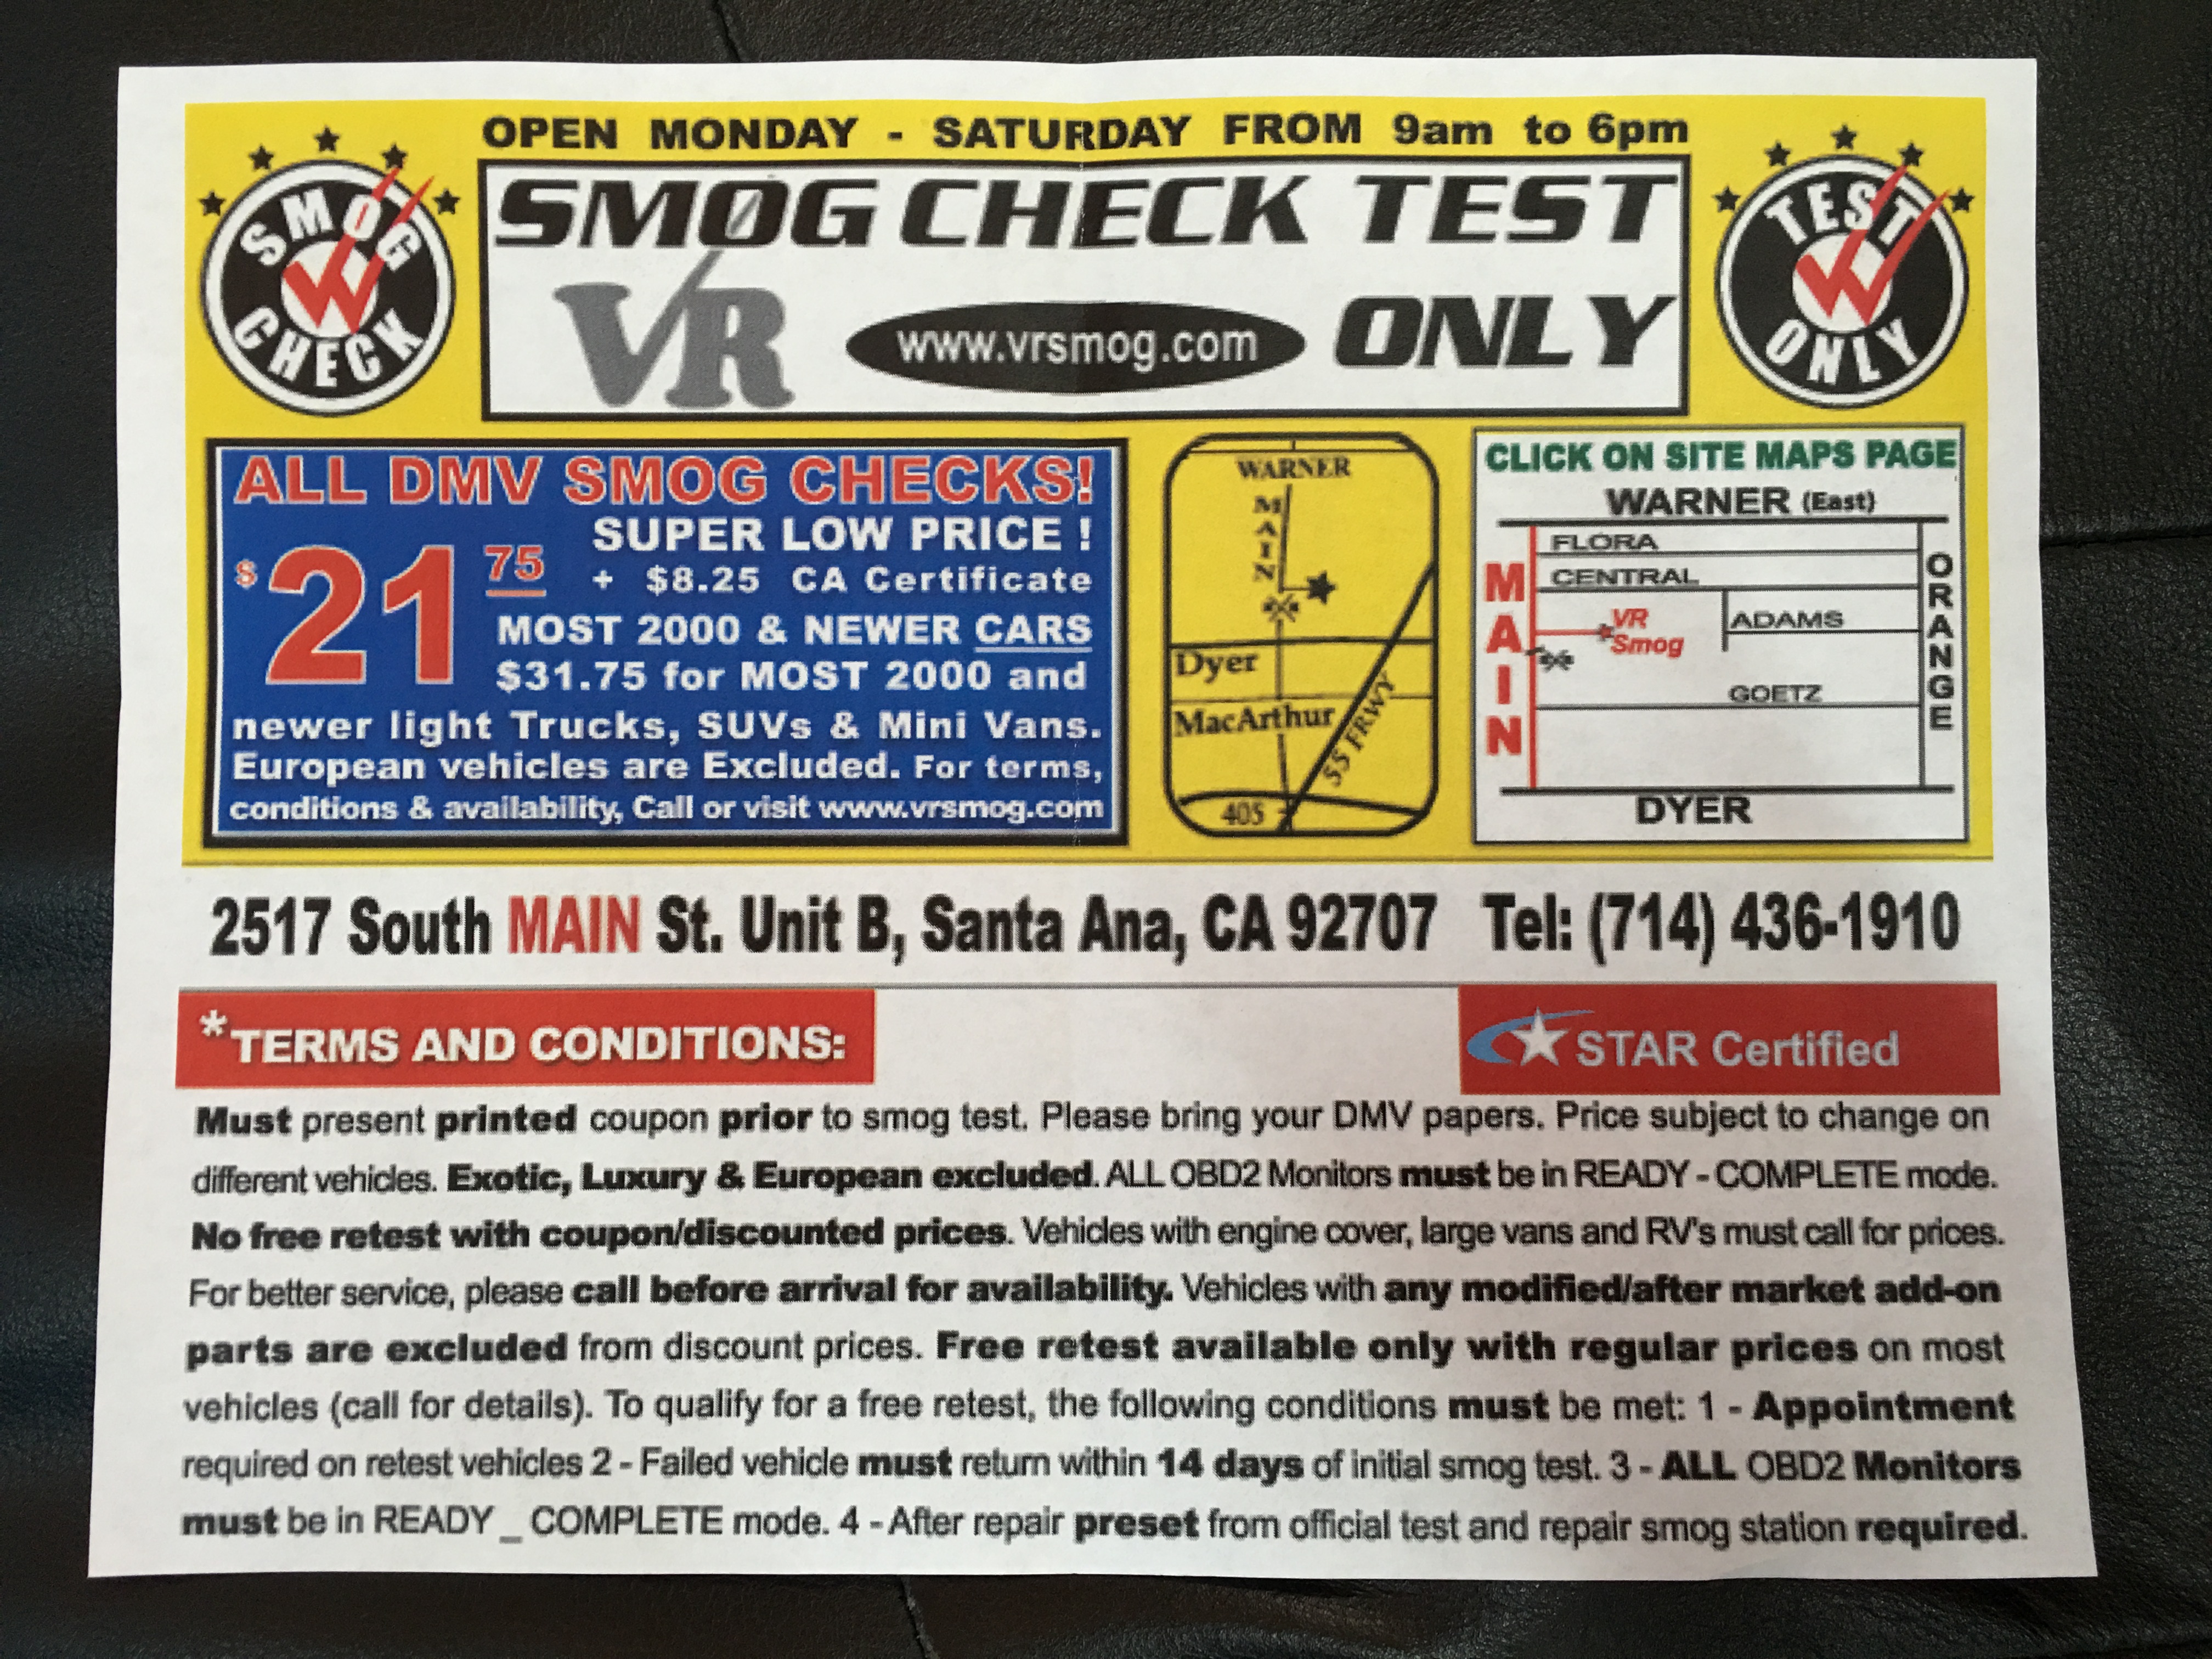 VR smog check test only Photo